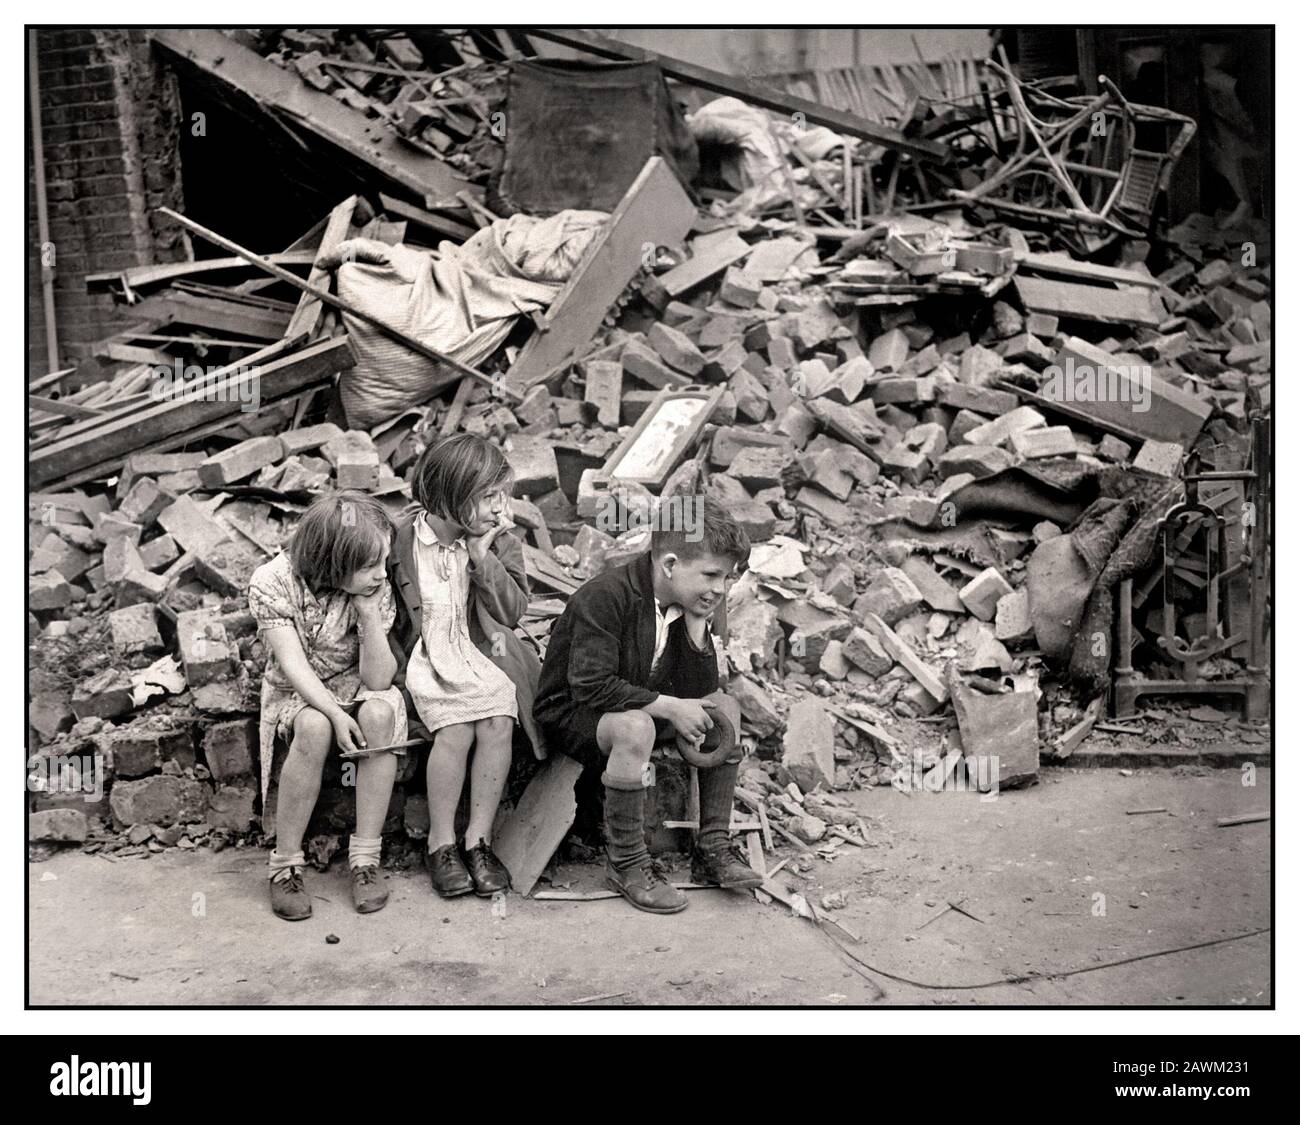 The London Blitz World War II 1940’s Children of East London, who have been made homeless by the random London Blitz bombs of Nazi Germany night bombing raids, waiting outside the wreckage of what was their home. September 1940. East London UK Stock Photo